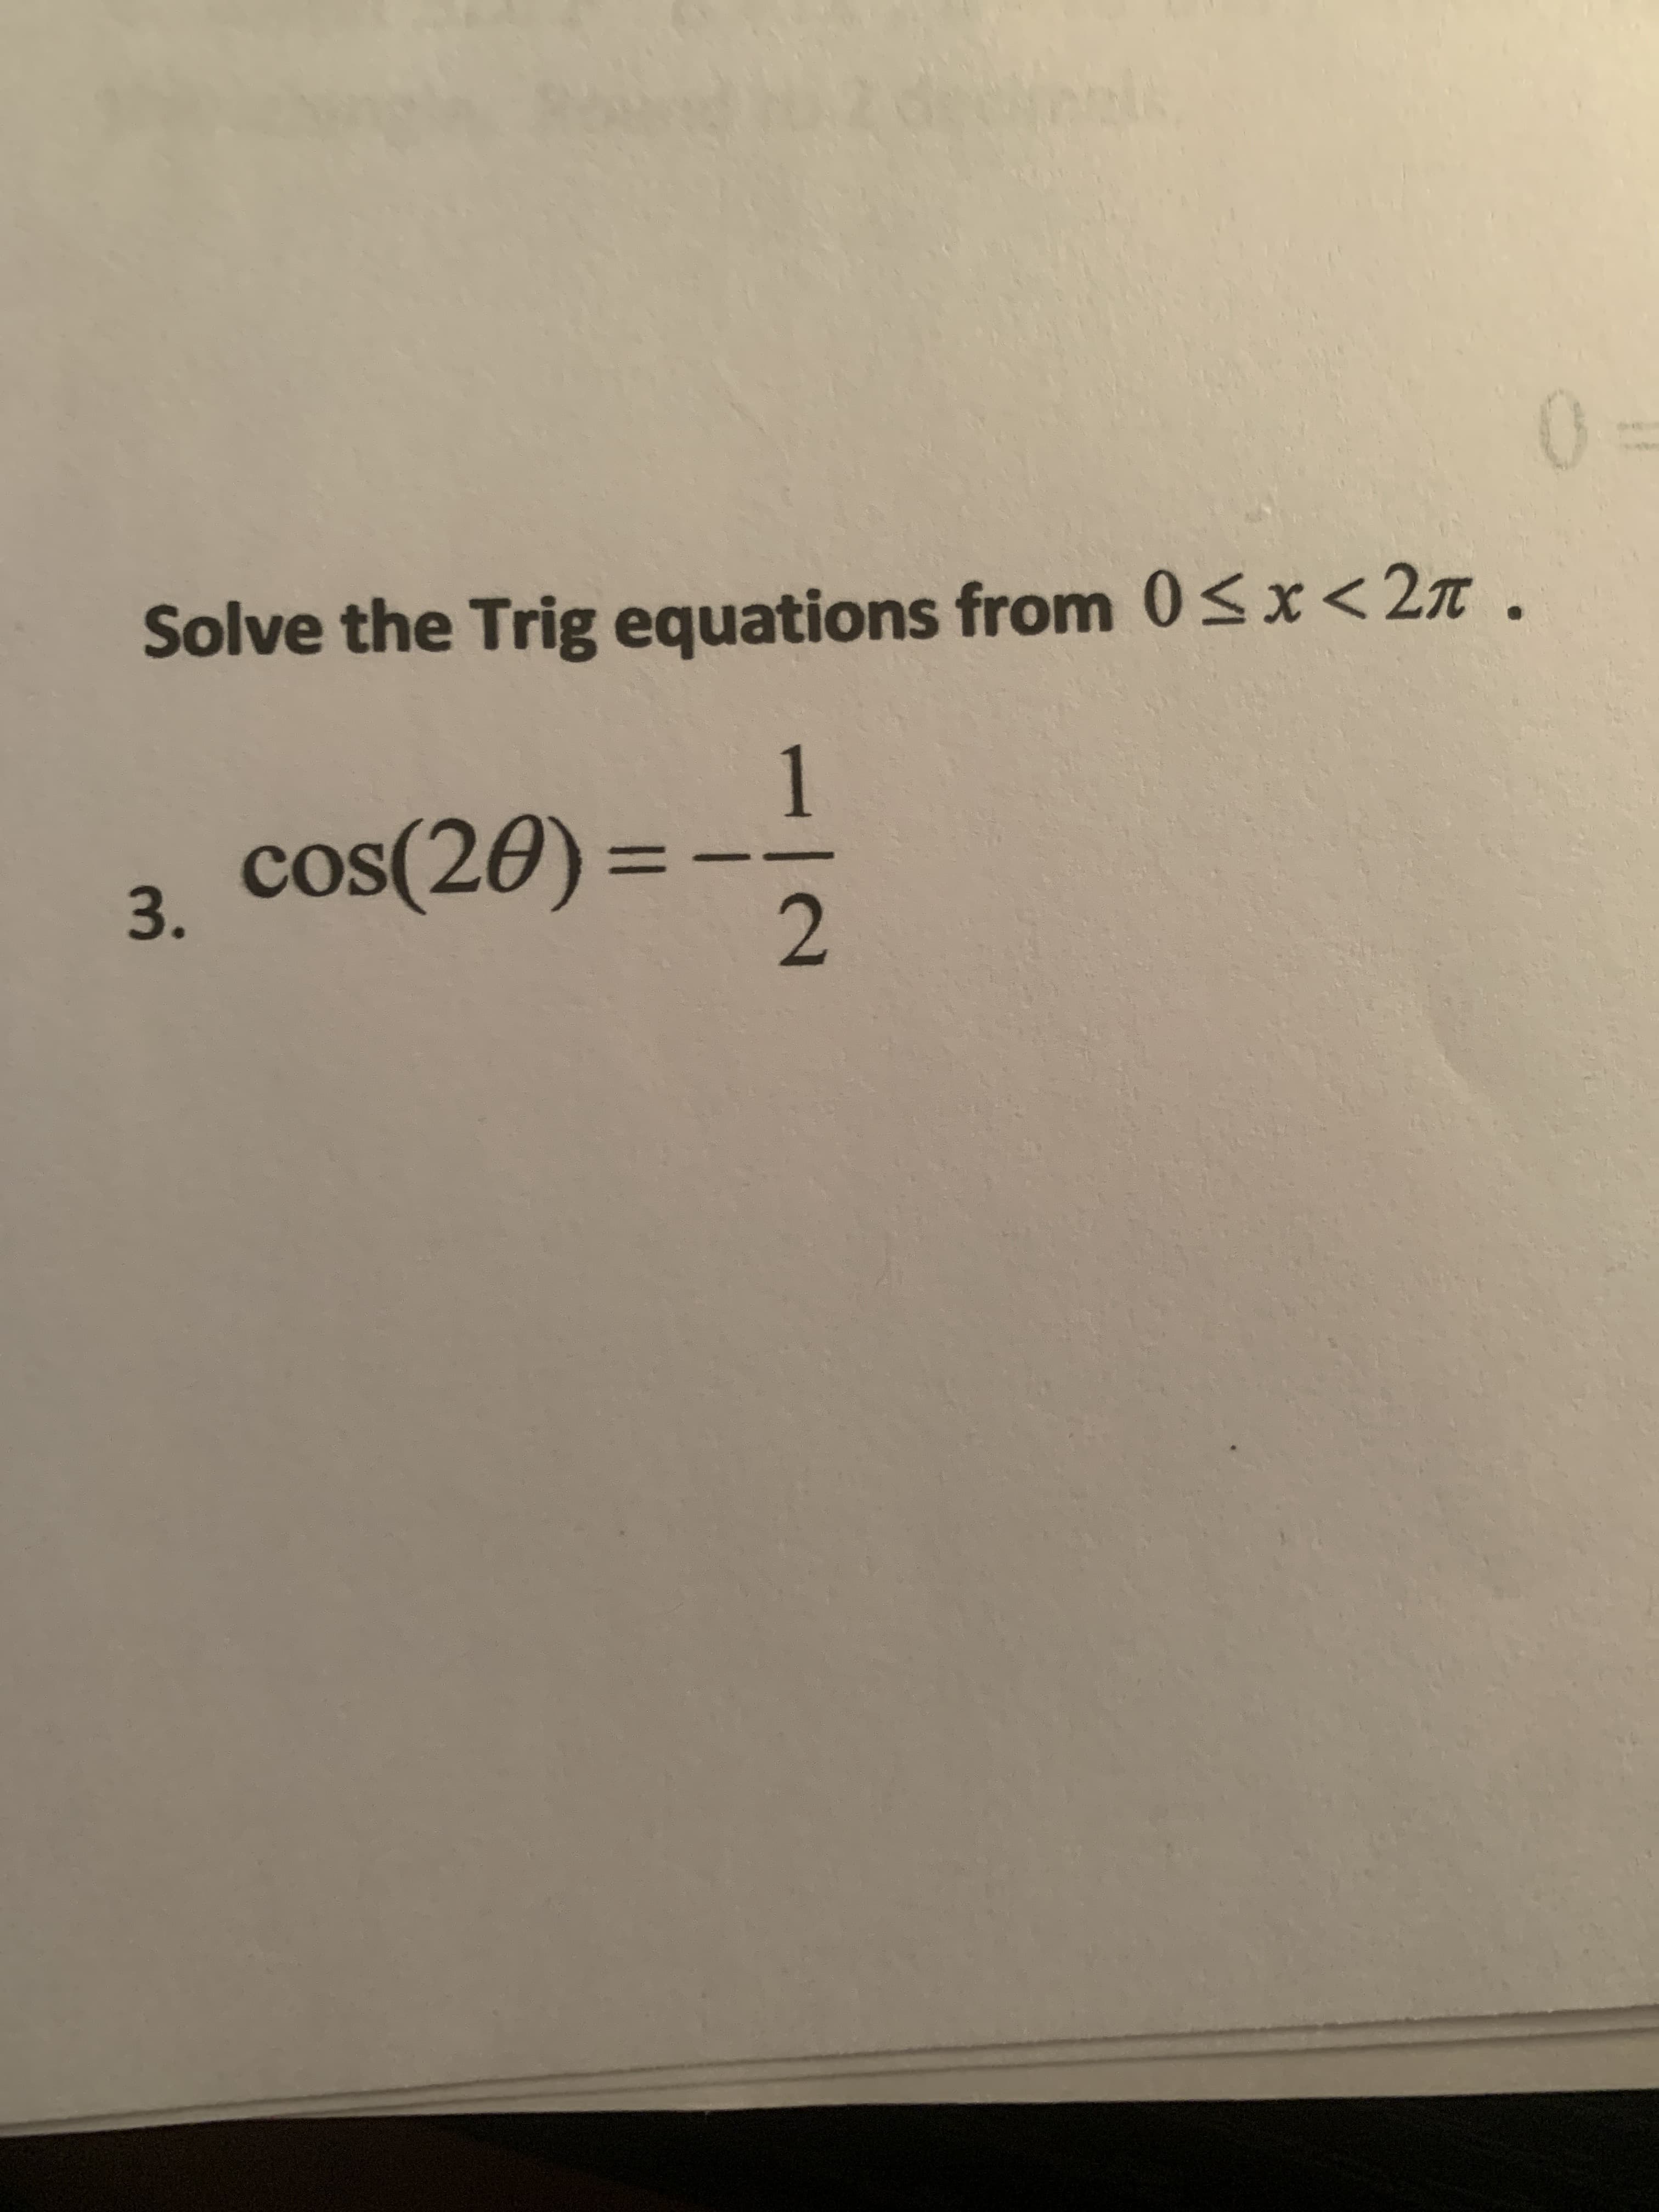 Solve the Trig equations from 0<x<2n.
1
cos(20)% =
cos
3.
%3D
